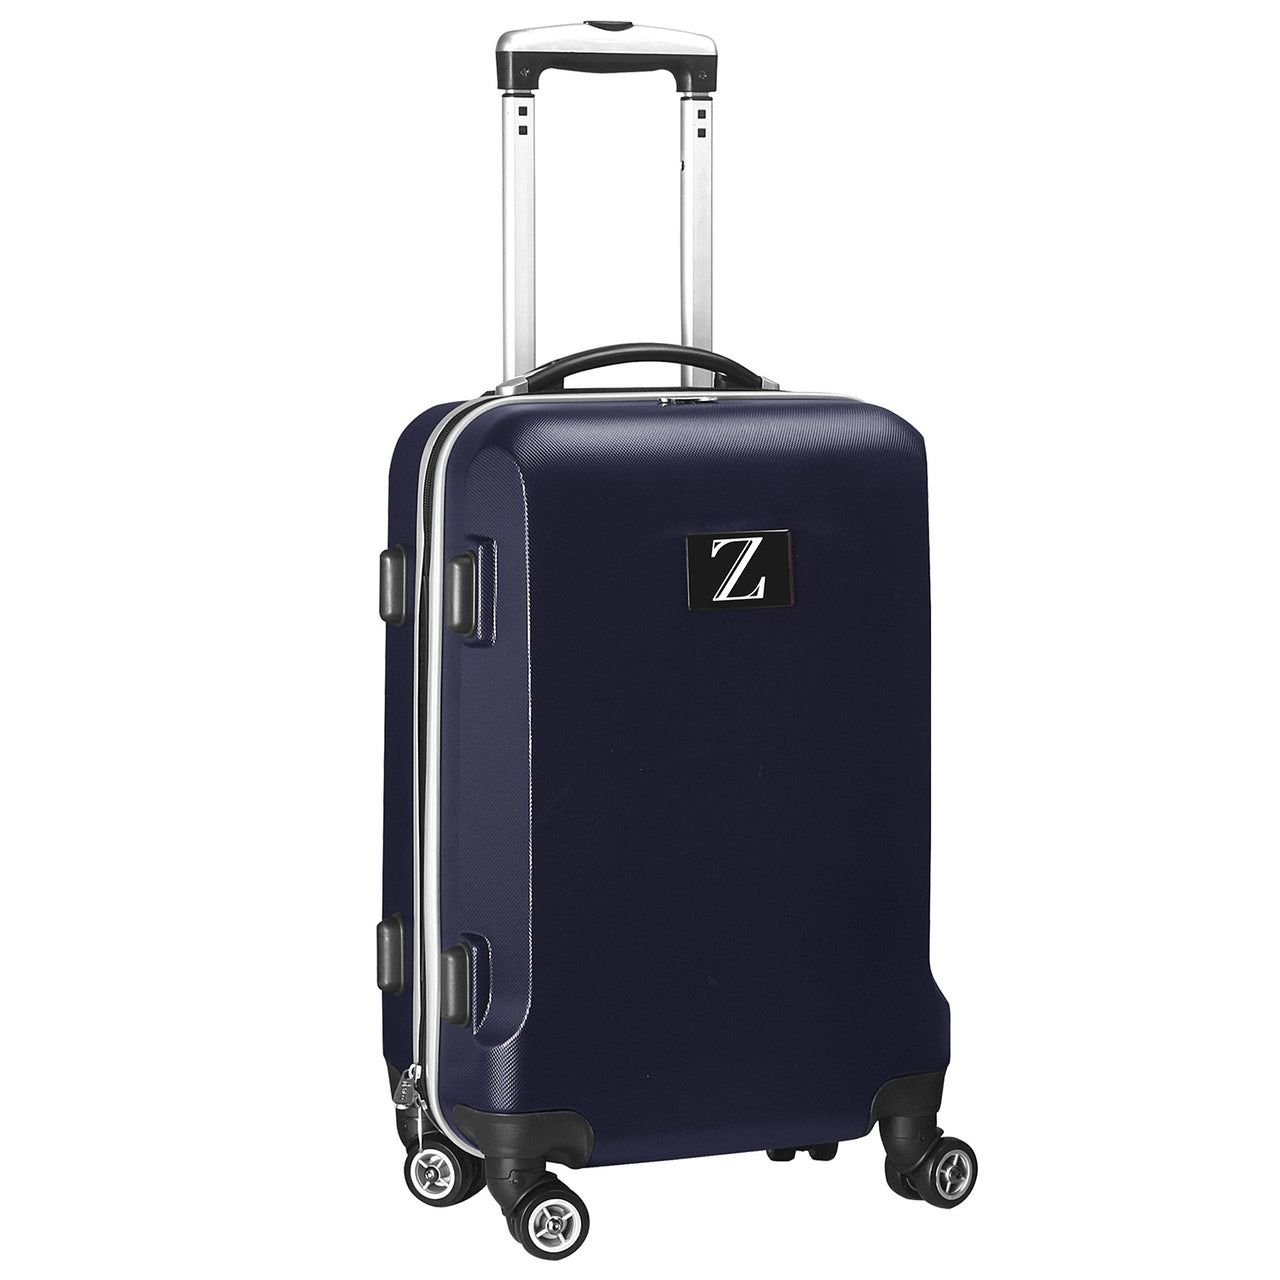 Personalized Initial Name letter "Z" 20 inches Carry on Hardcase Spinner Luggage by Mojo  in NAVY